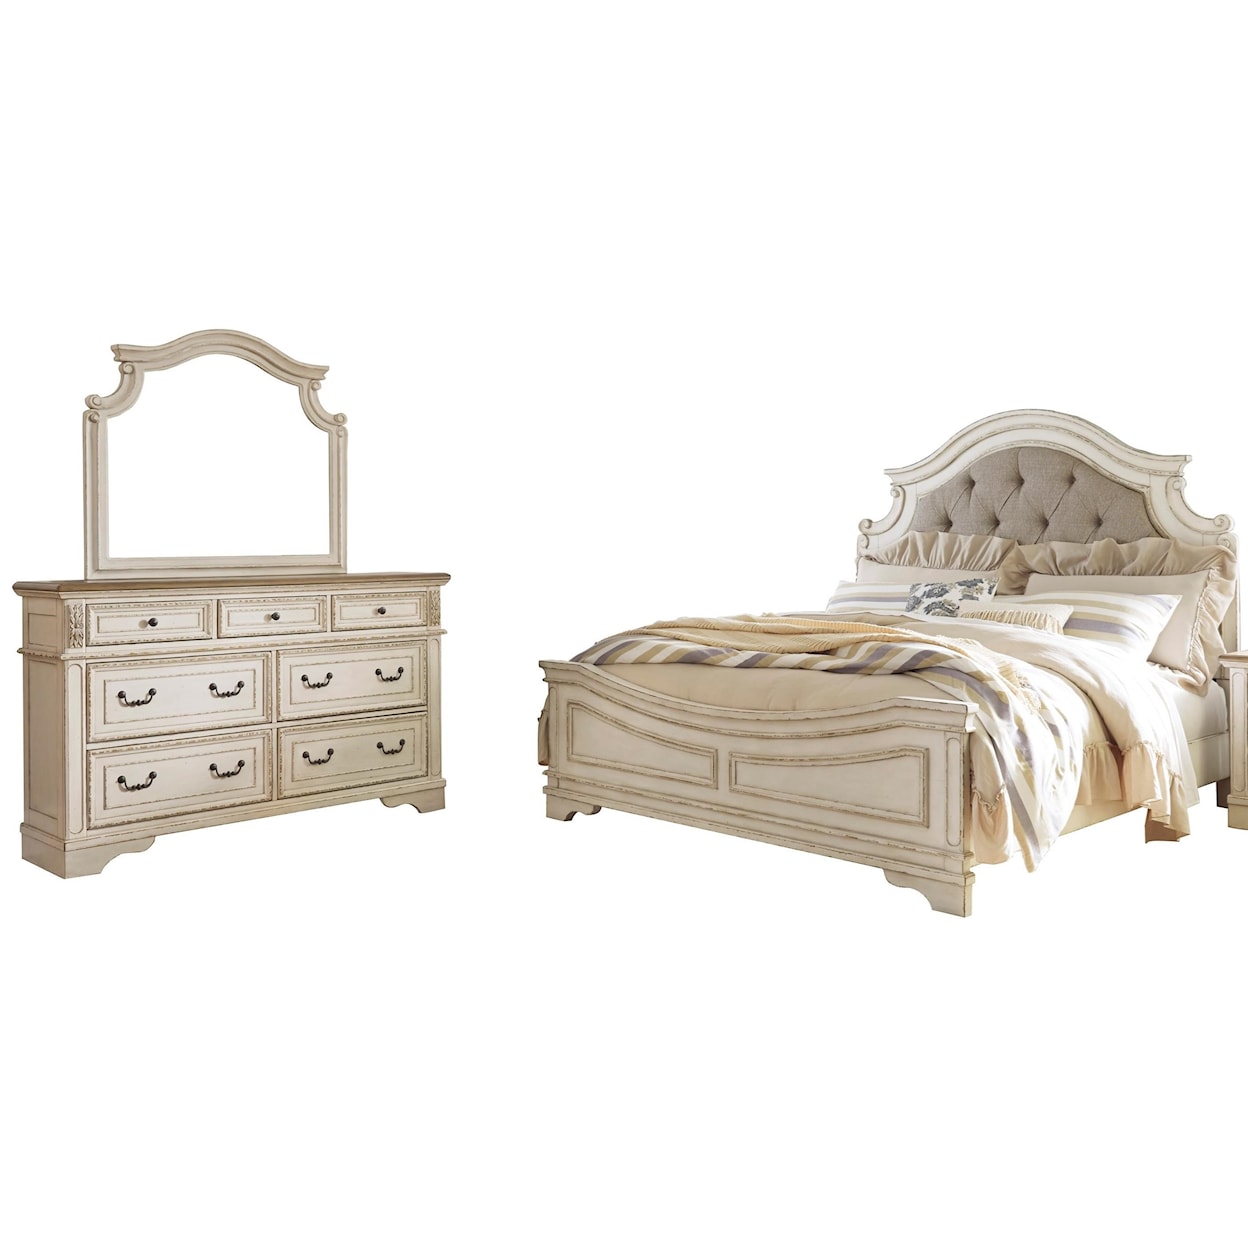 Signature Design by Ashley Realyn 5pc Queen Bedroom Group